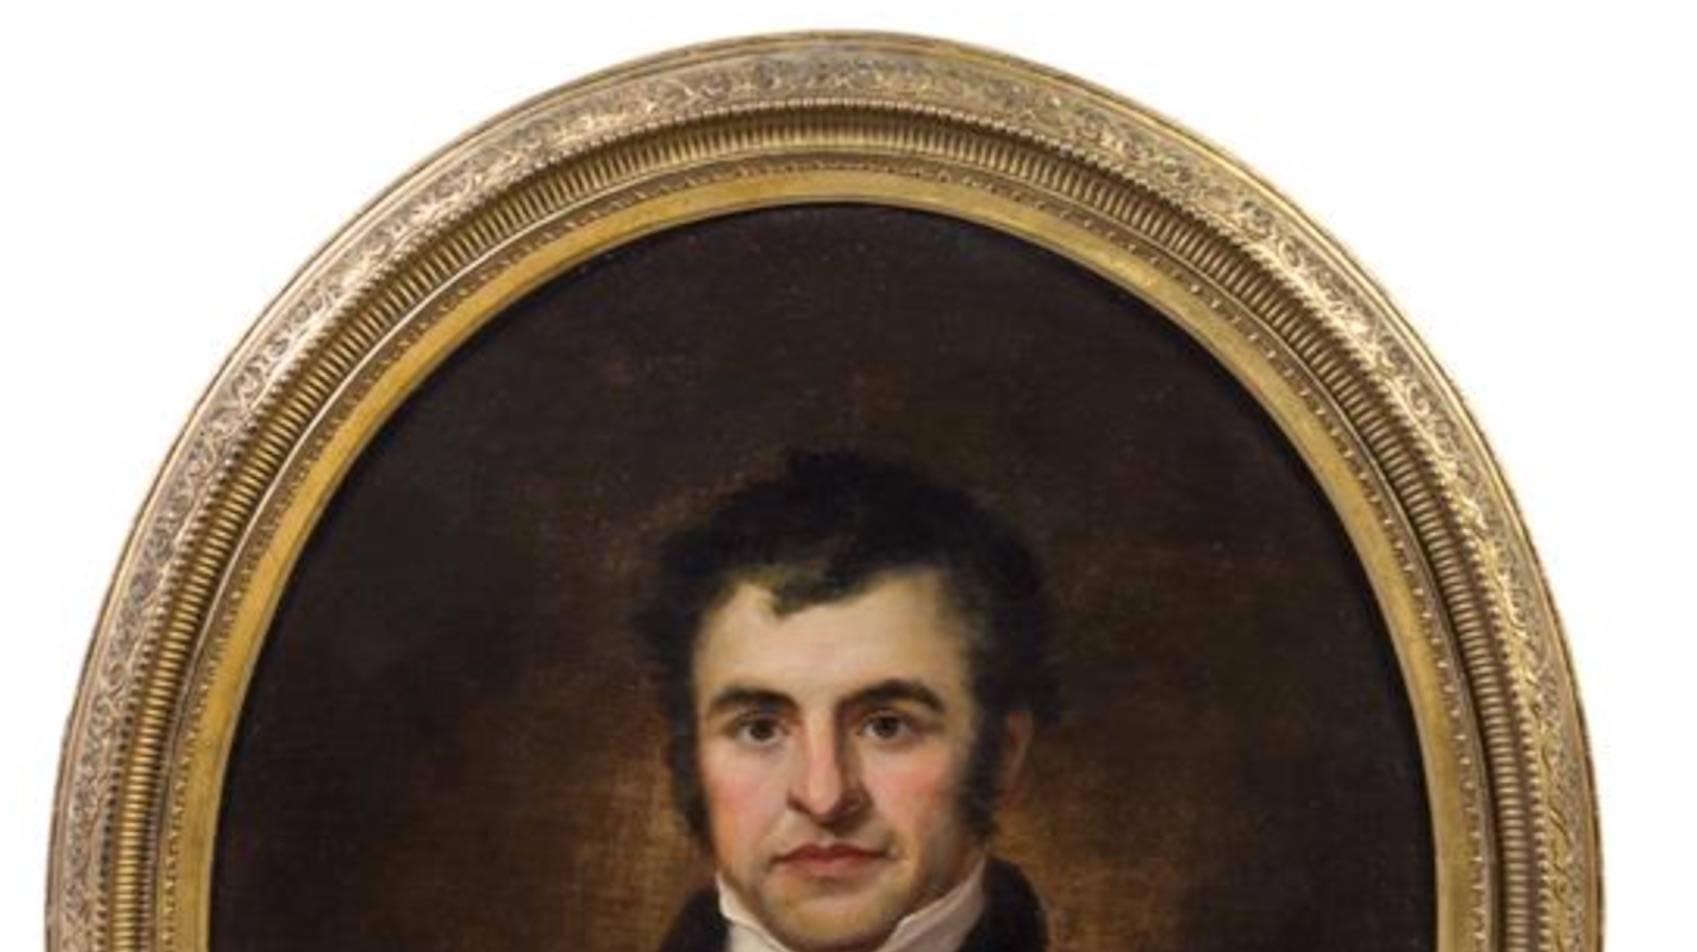 Artist unknown 
(19th century) 
Portrait of Robert Burns 
Oil on canvas 
Measures: 29 3/4 x 24 5/8 inches. Handsome and in very good conditions.